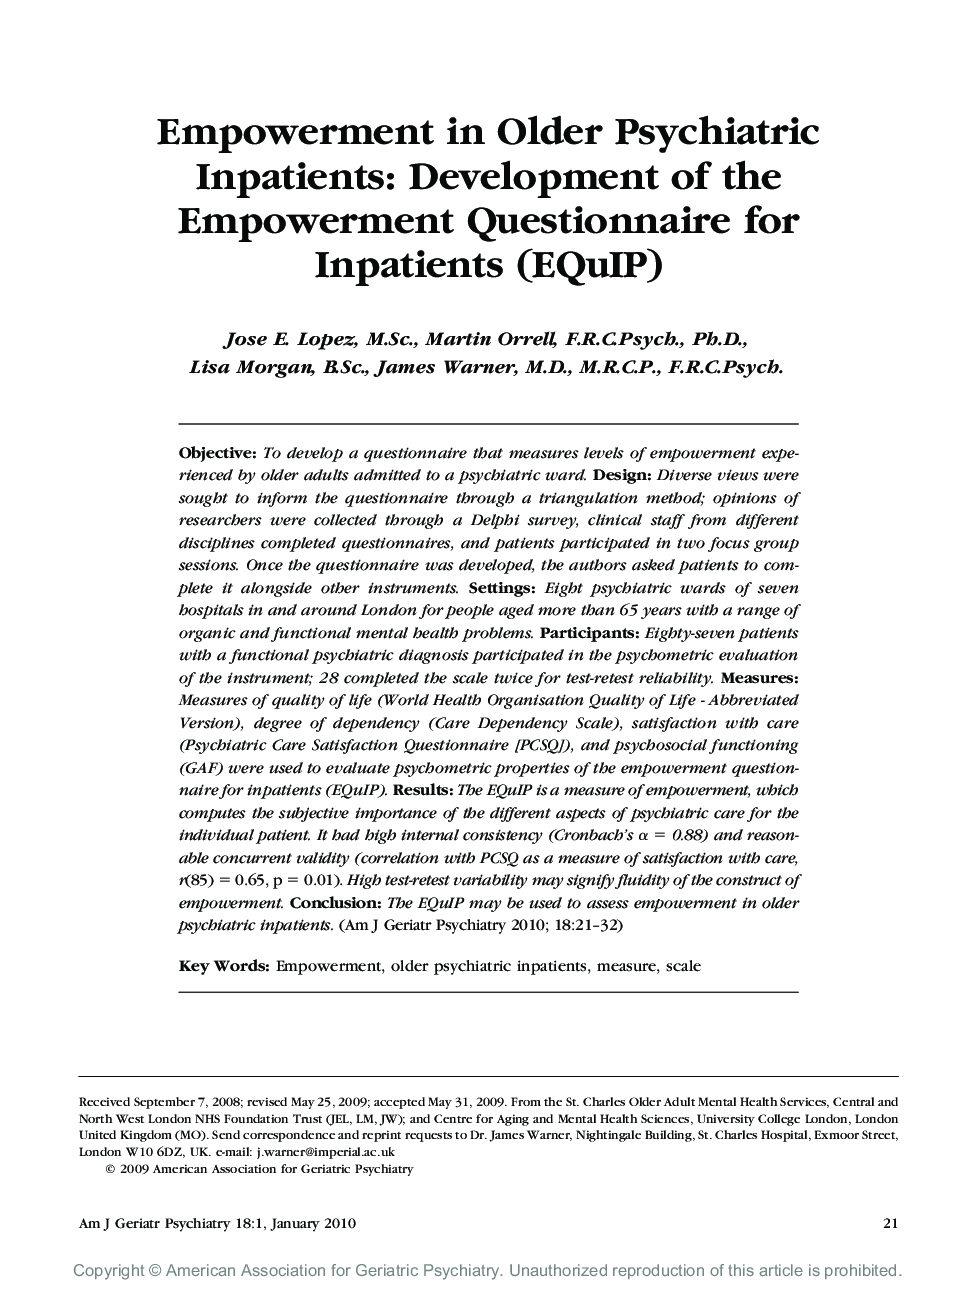 Empowerment in Older Psychiatric Inpatients: Development of the Empowerment Questionnaire for Inpatients (EQuIP)